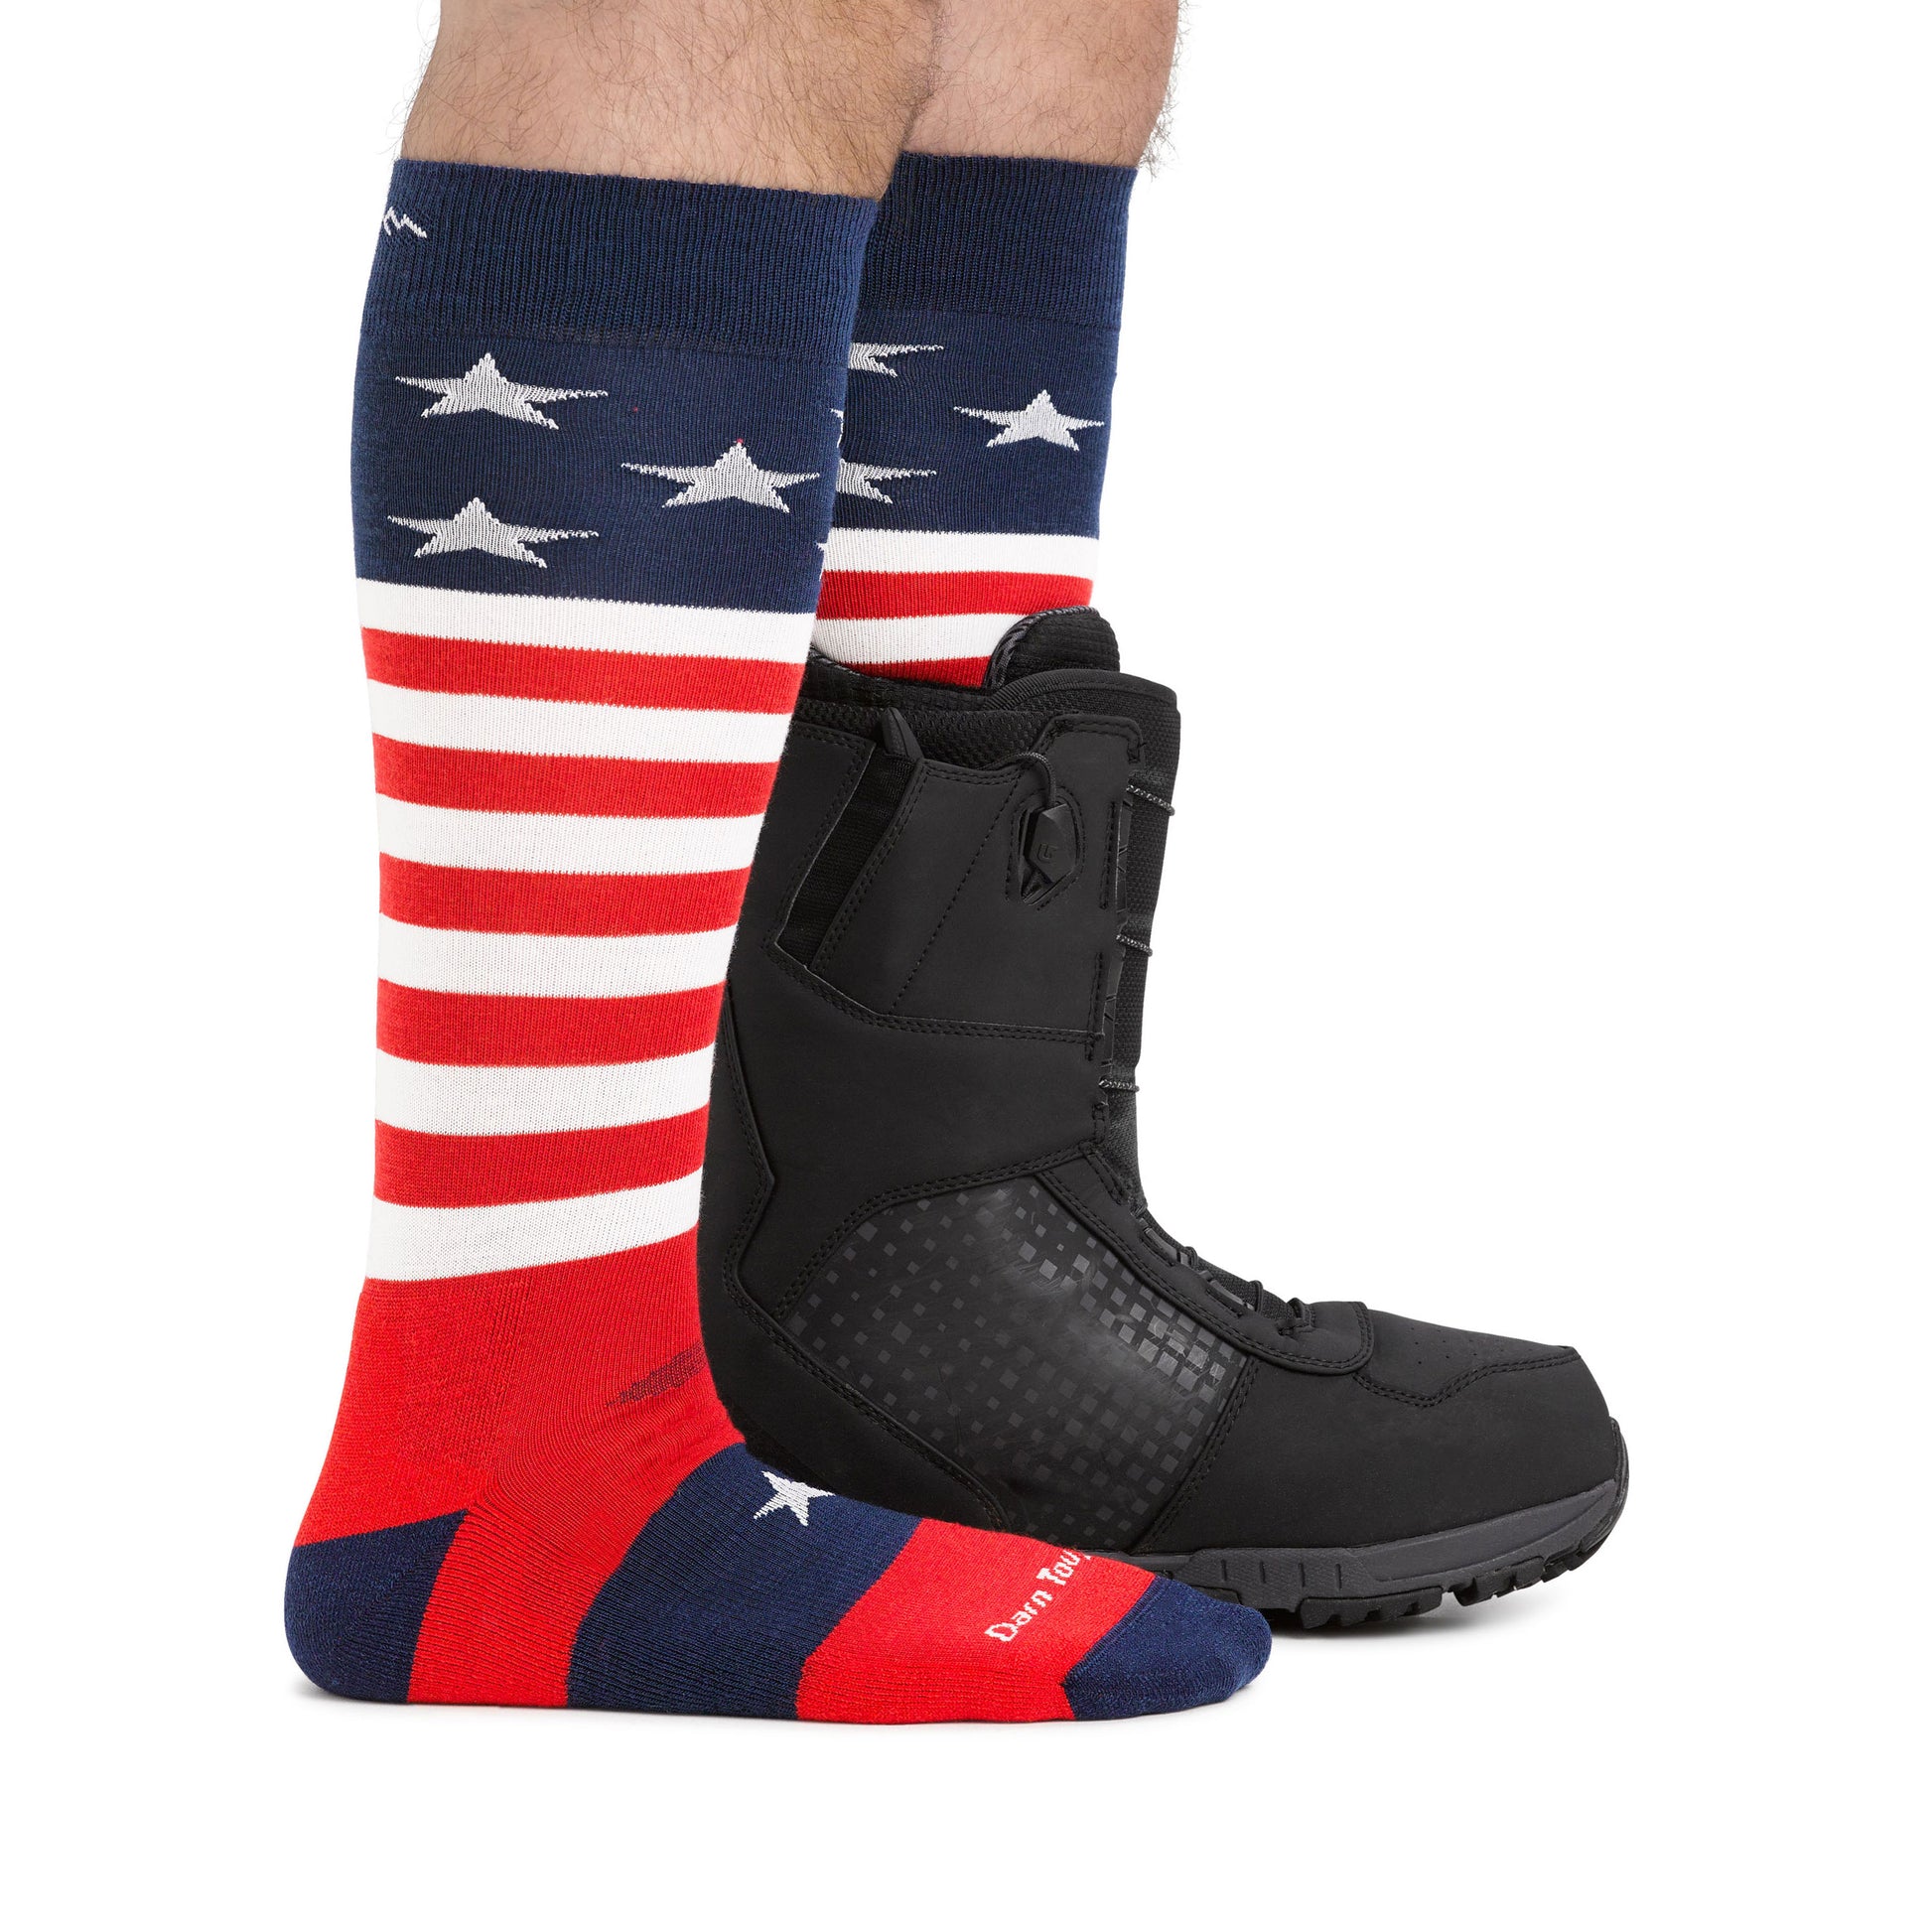 Darn Tough Stars and stripes socks on model wearing a snowboard boot